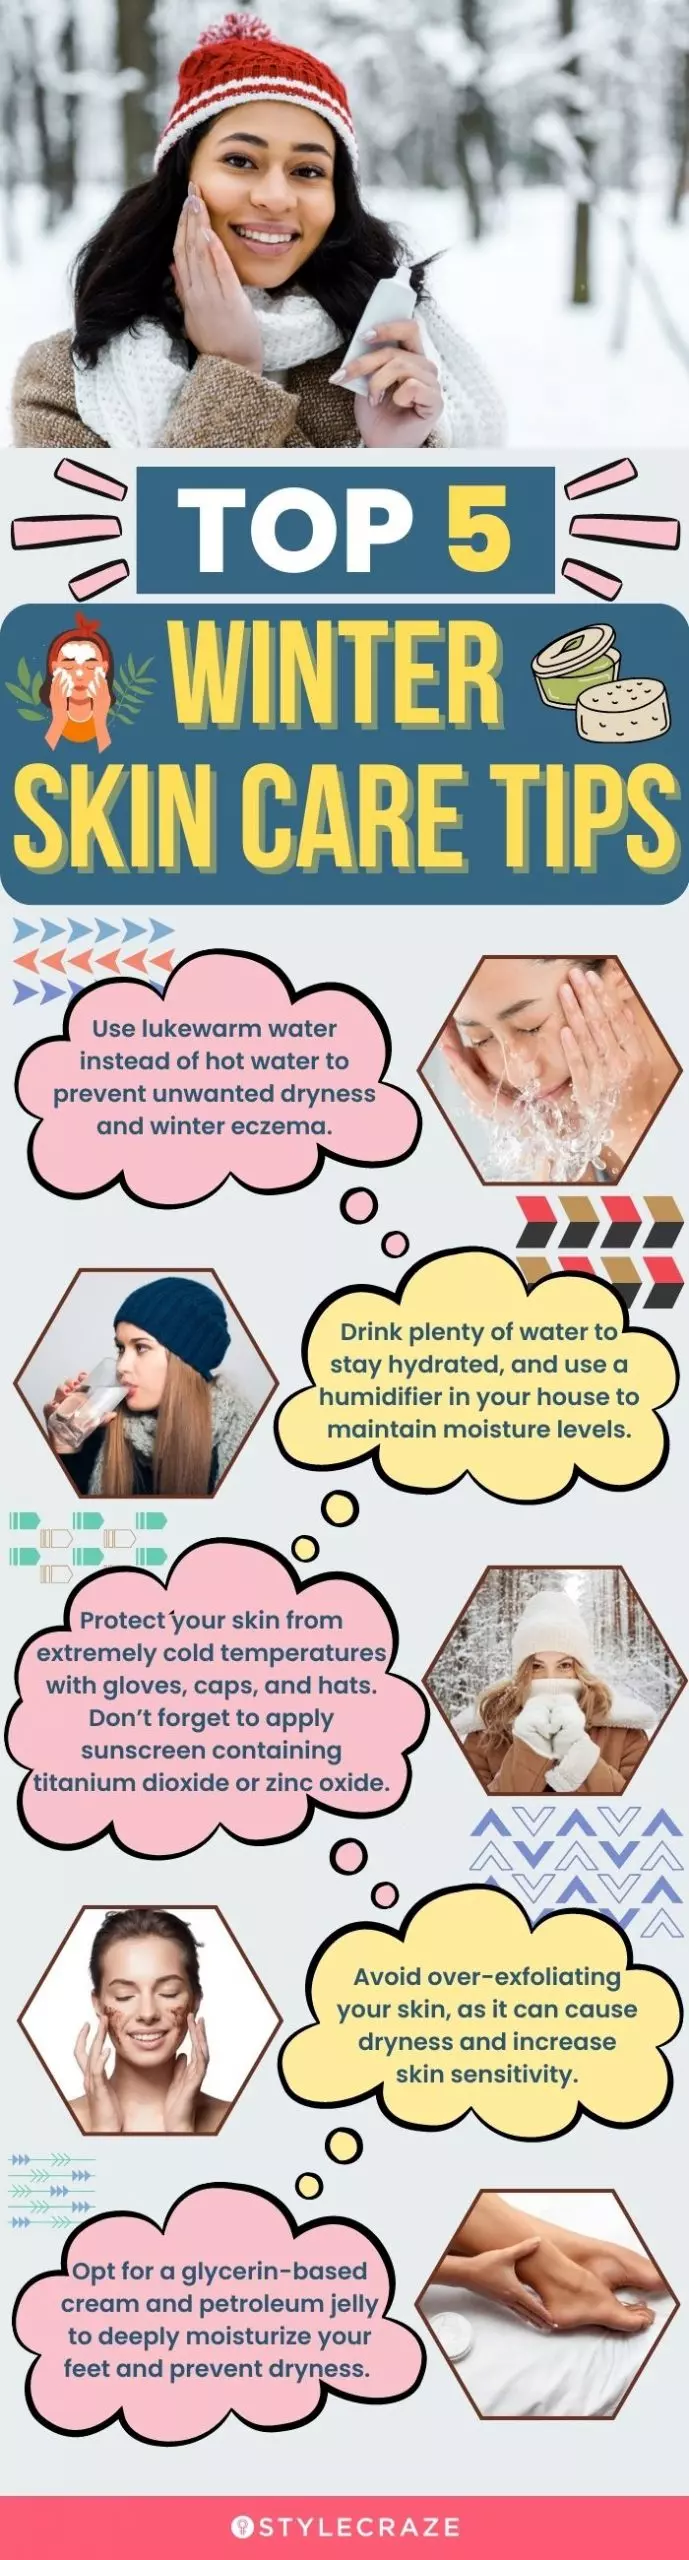 top 5 winter skincare tips (infographic)